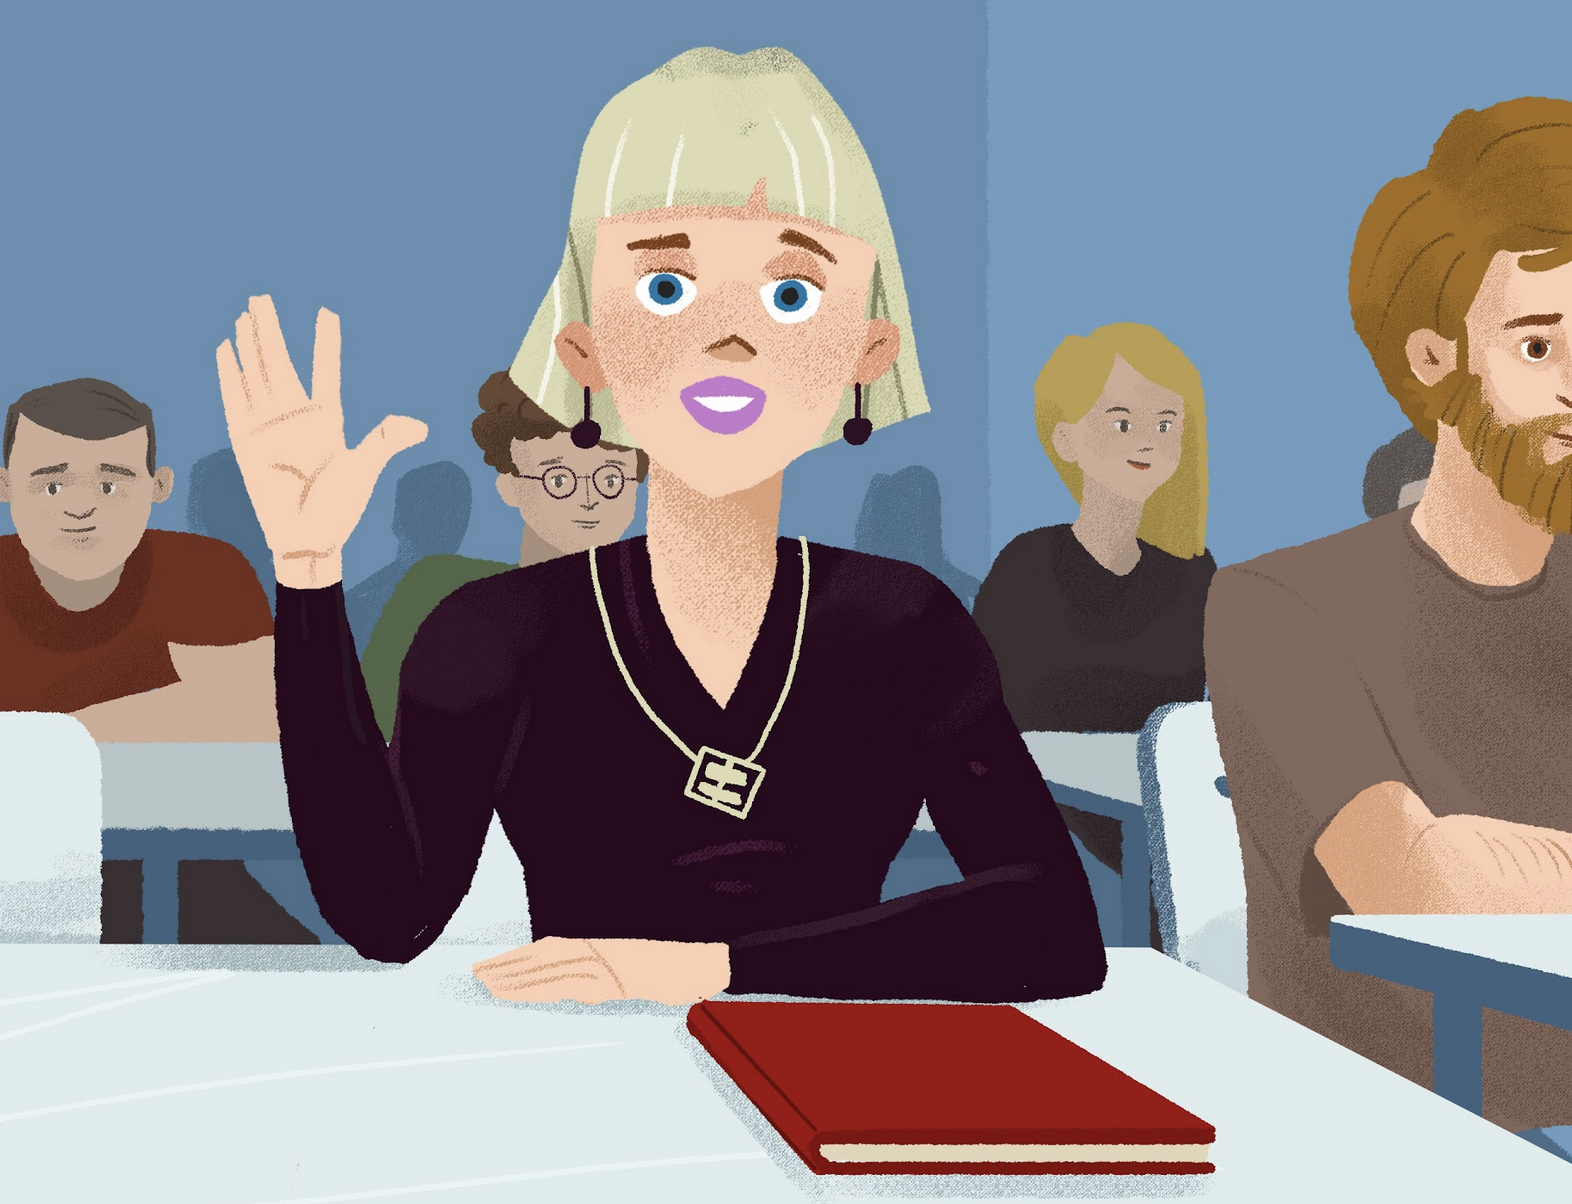 A cartoon of a student sitting at her desk a closed book in front of her, surrounded by other students. She is raising her hand to answer a question.